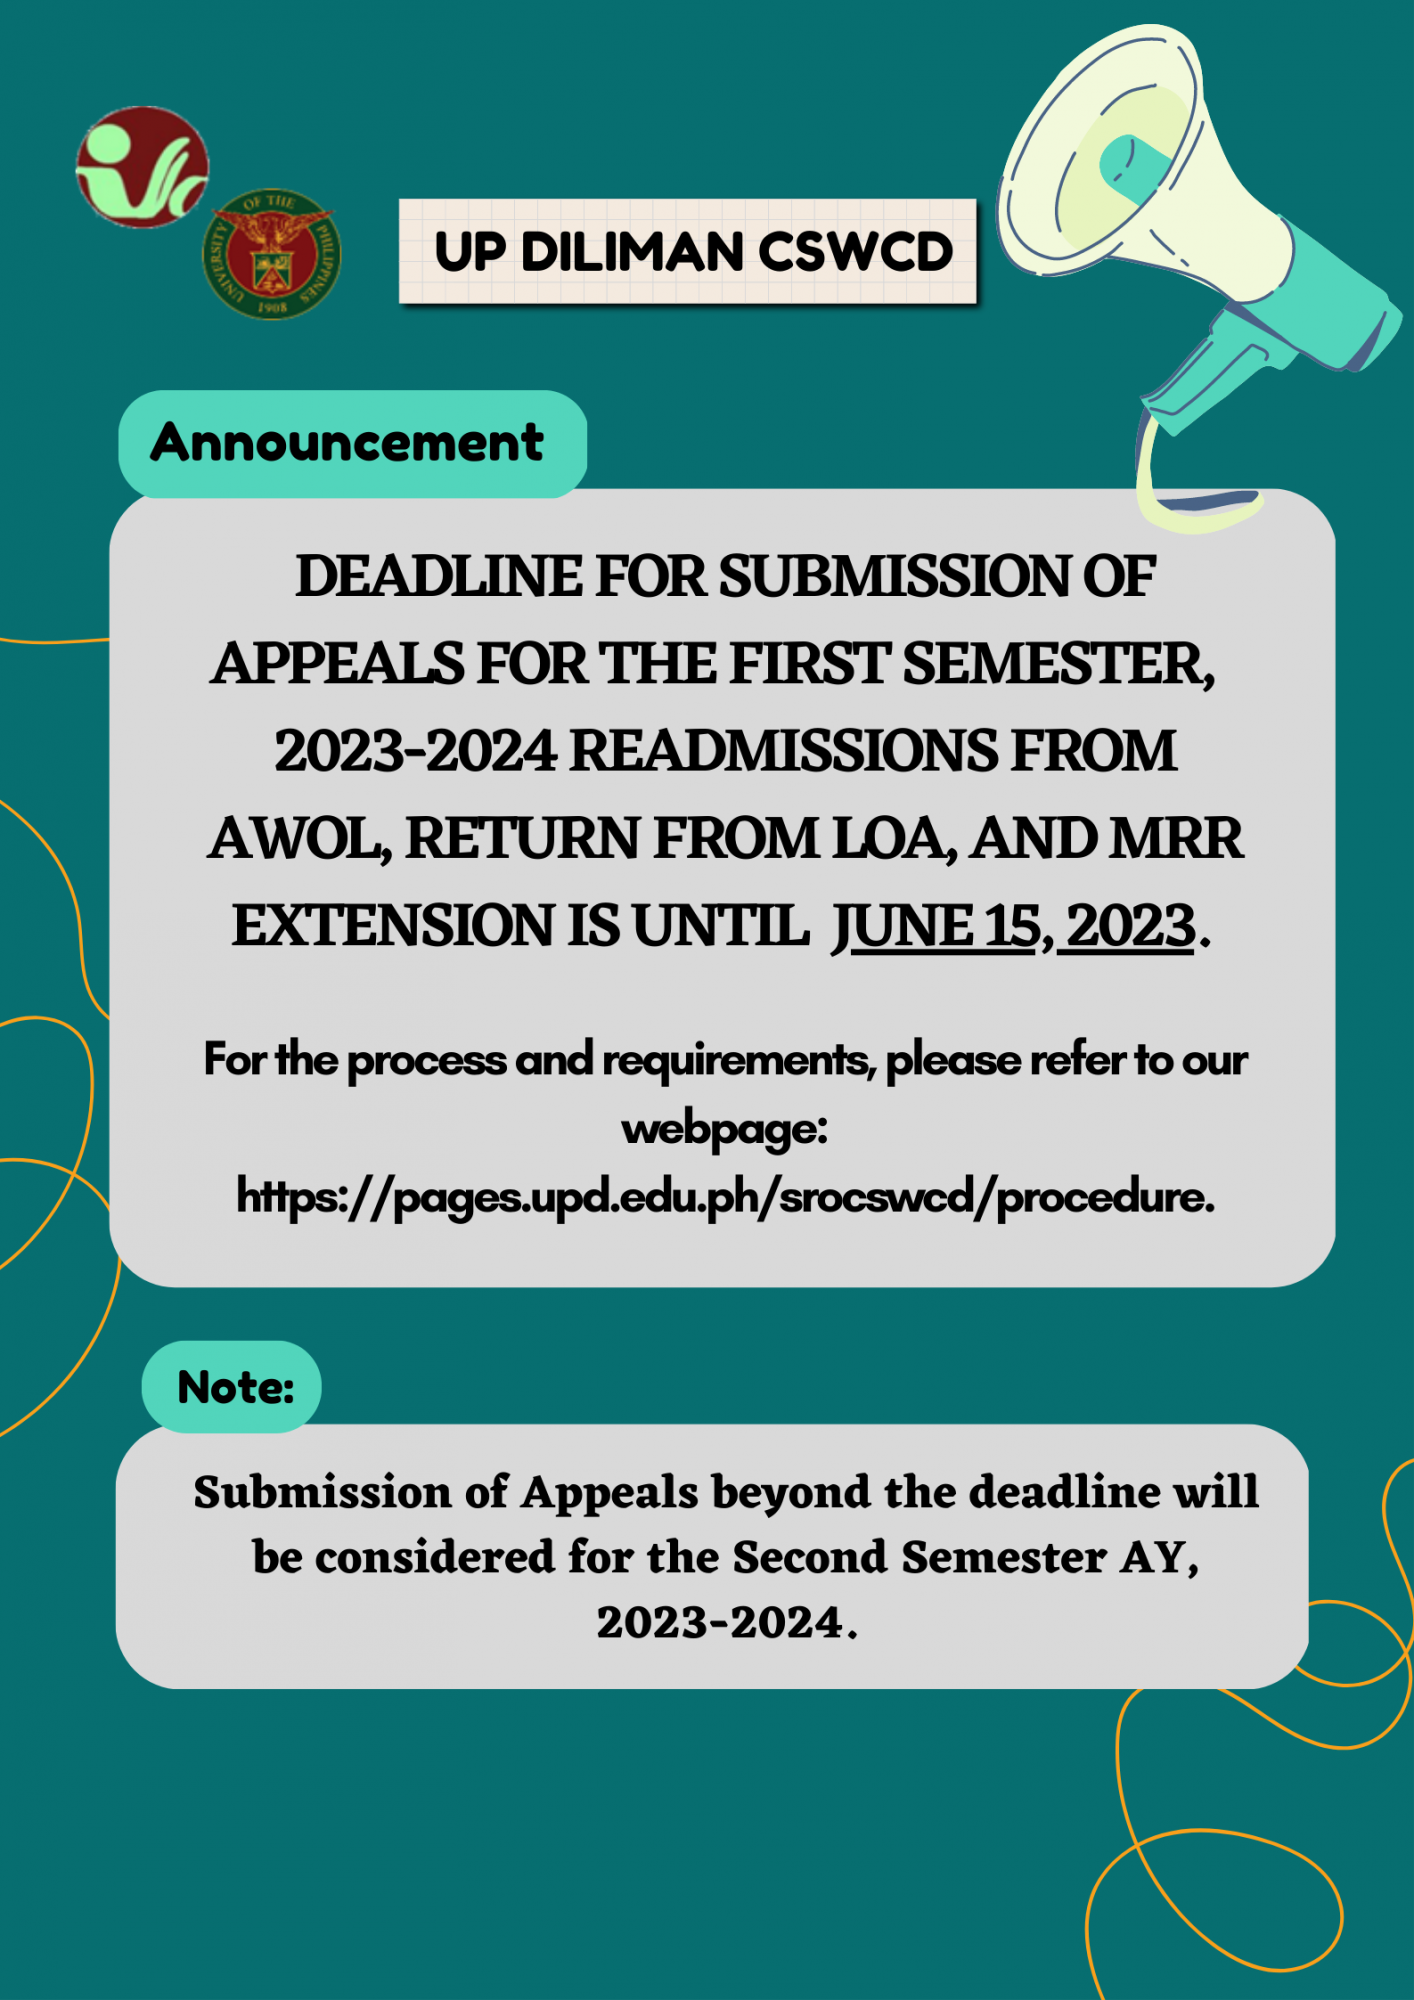 Deadline for Submission of Appeals for the First Semester AY 2023-2024 Readmissions from AWOL, Return from LOA, and MRR Extension